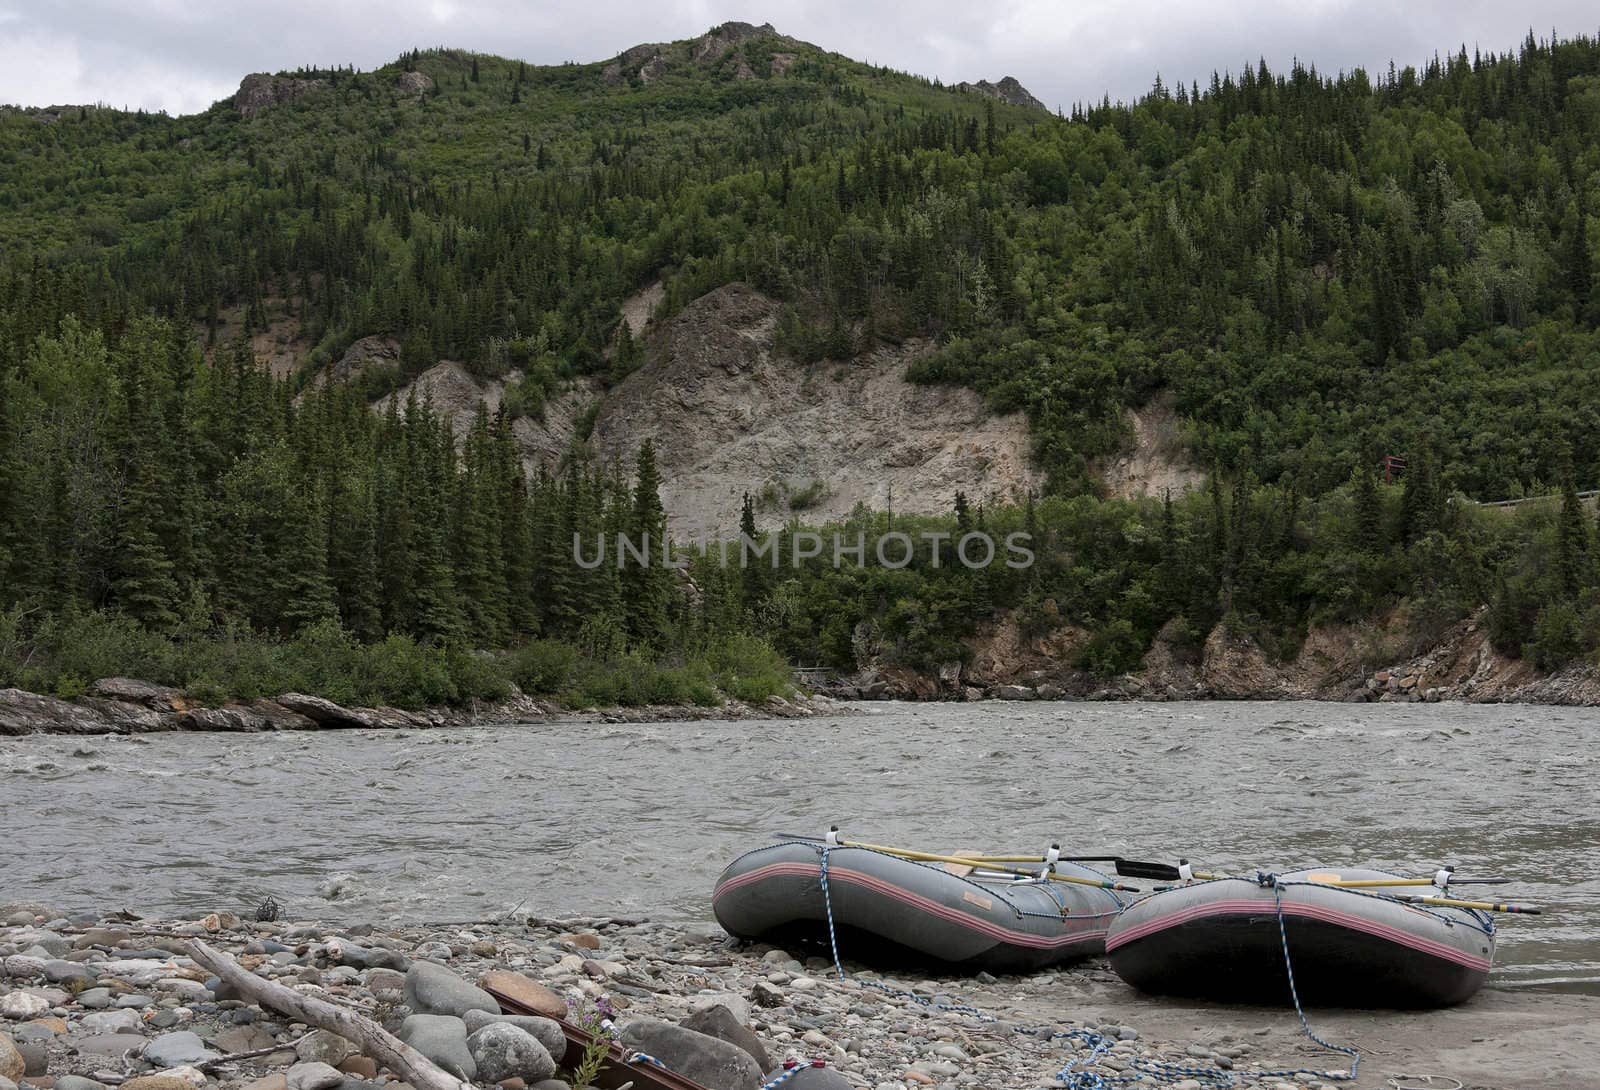 Two boats resting on the shore of a grey wild river.